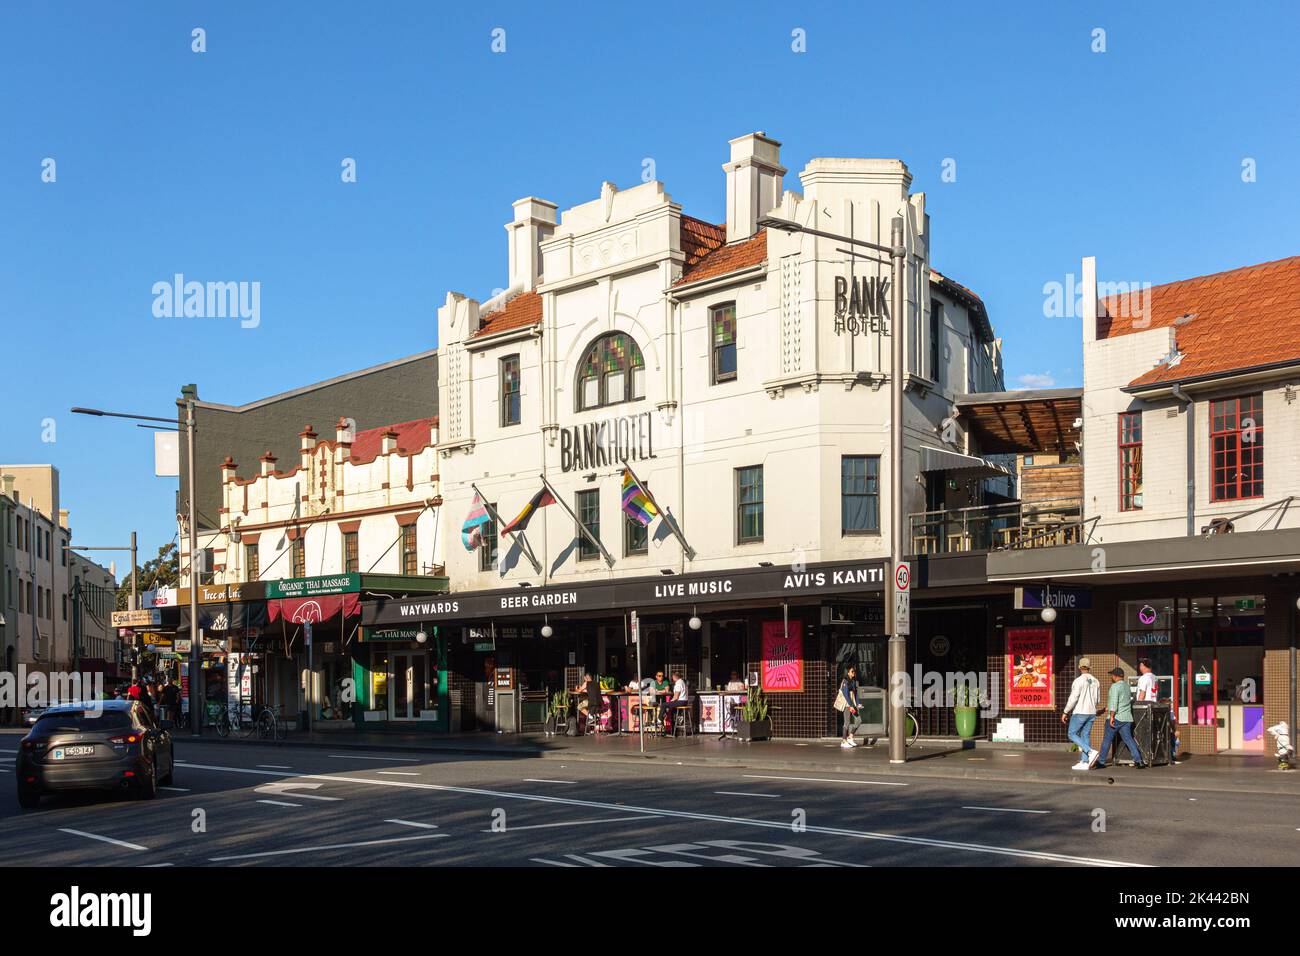 The Bank Hotel along North King Street in Newtown, Sydney Stock Photo